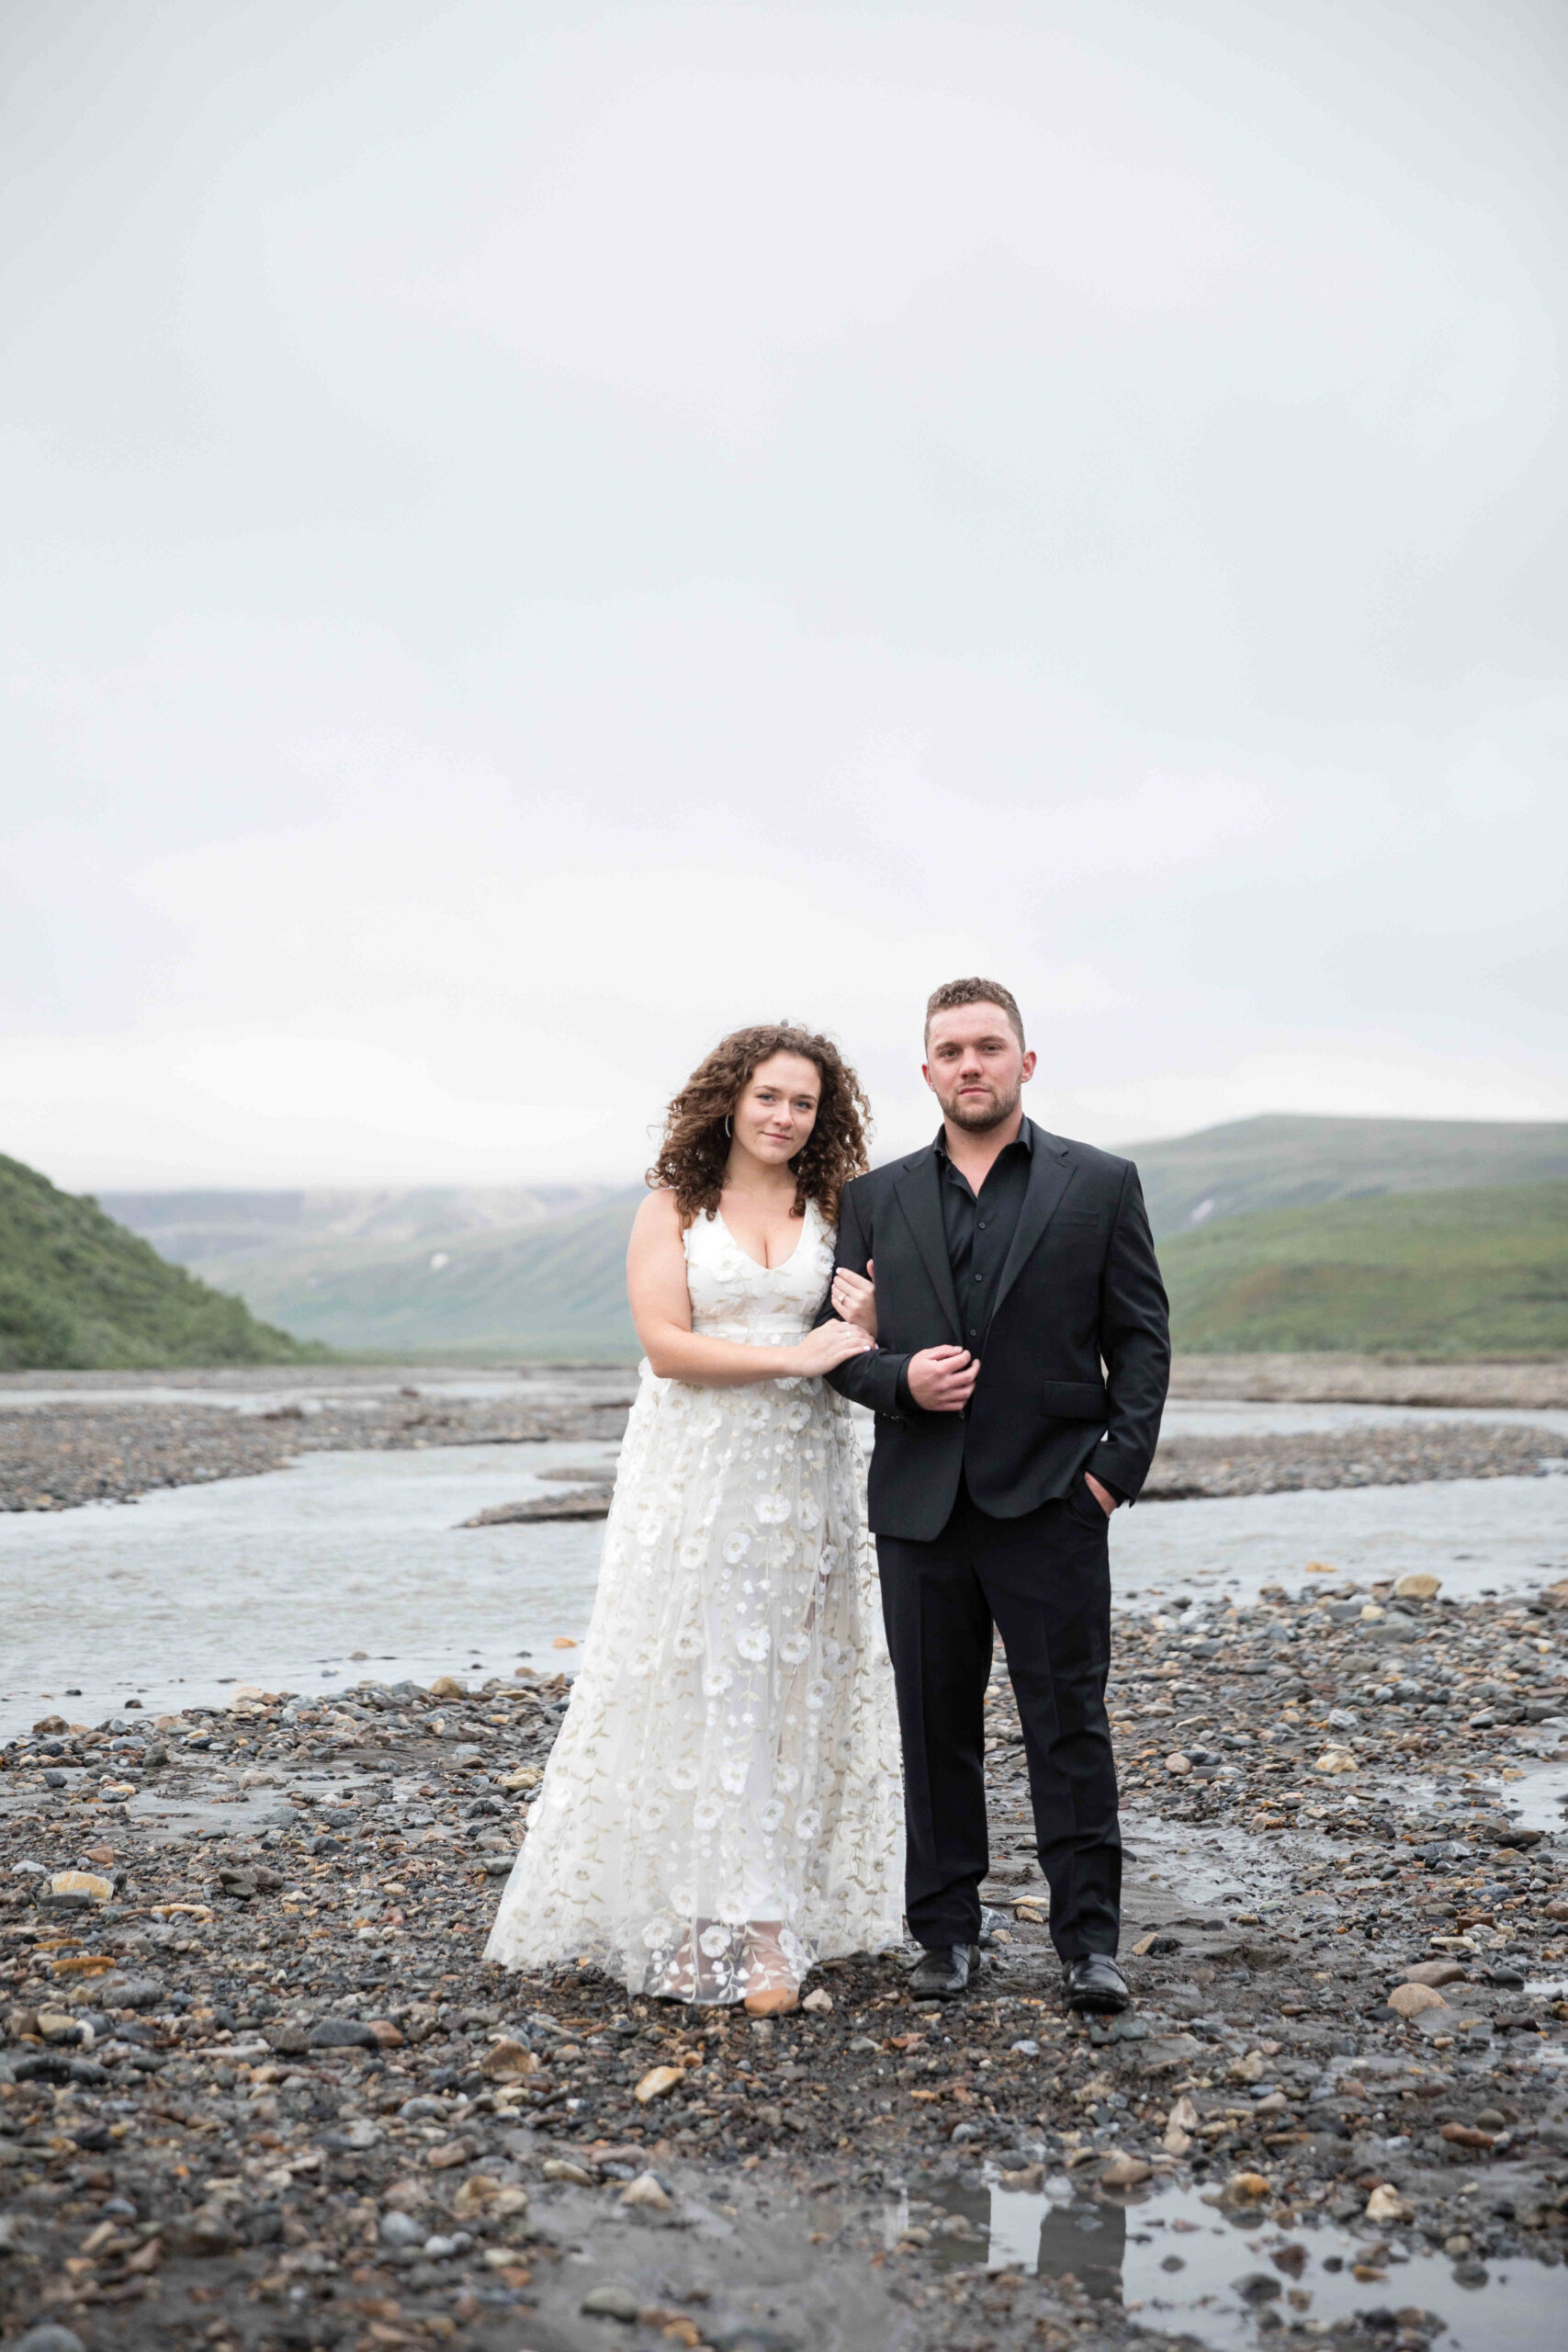 Koby Brown Photography, Sadie and Zach, Alaska Engagement Session, Adventure Session, Denali National Park East Fork River